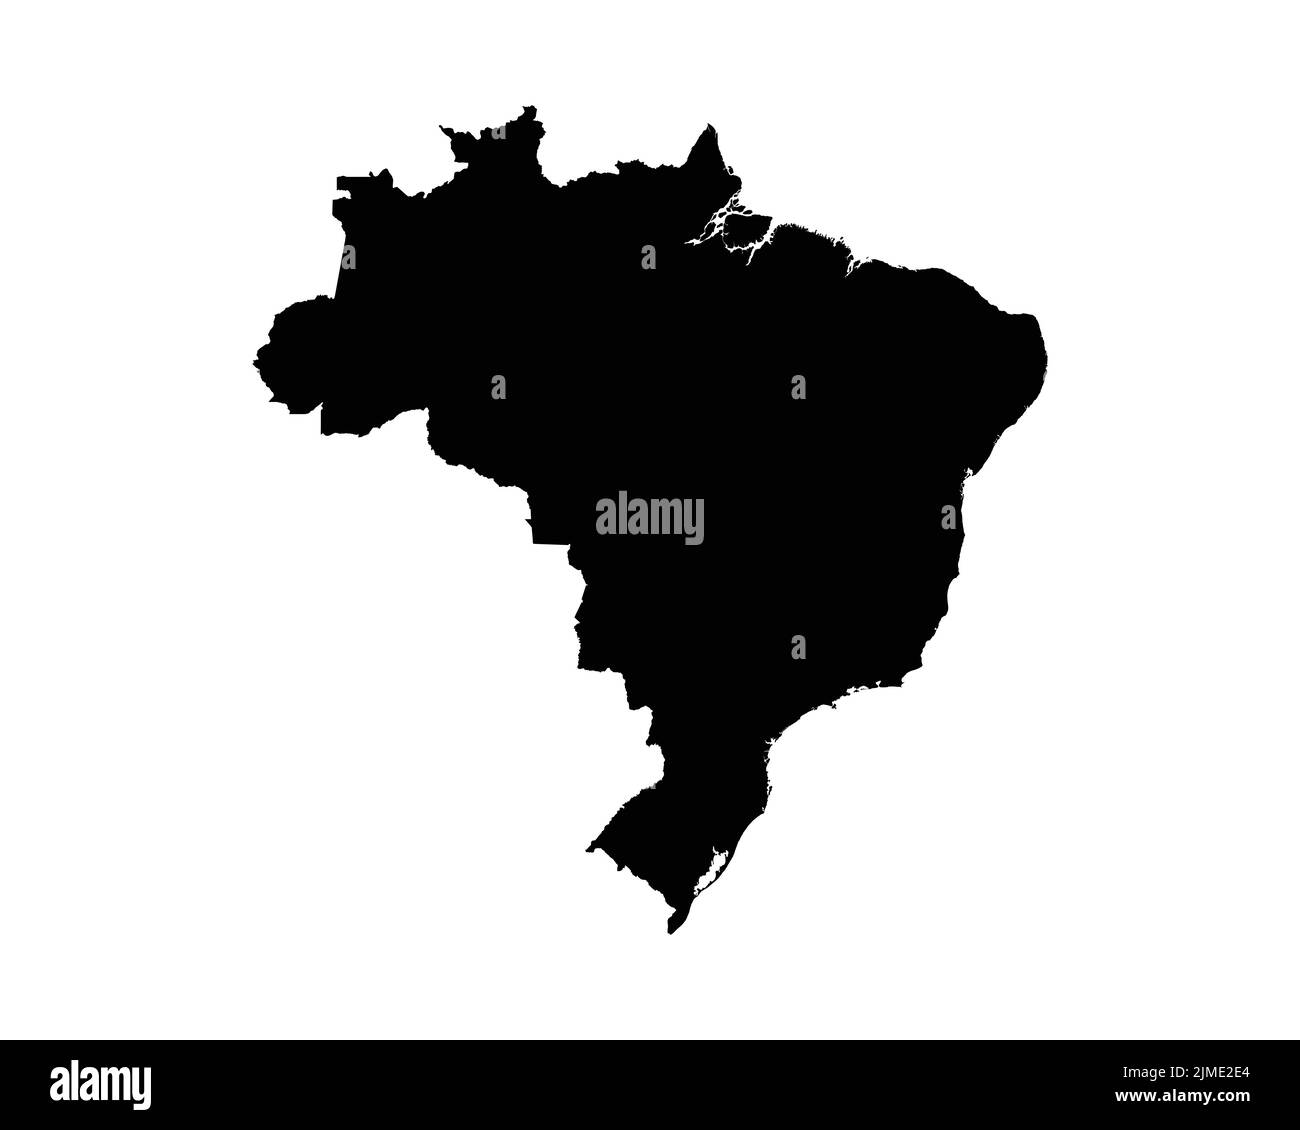 Brazil Map. Brazilian Country Map. Black and White National Outline Border Boundary Shape Geography Territory EPS Vector Illustration Clipart Stock Vector